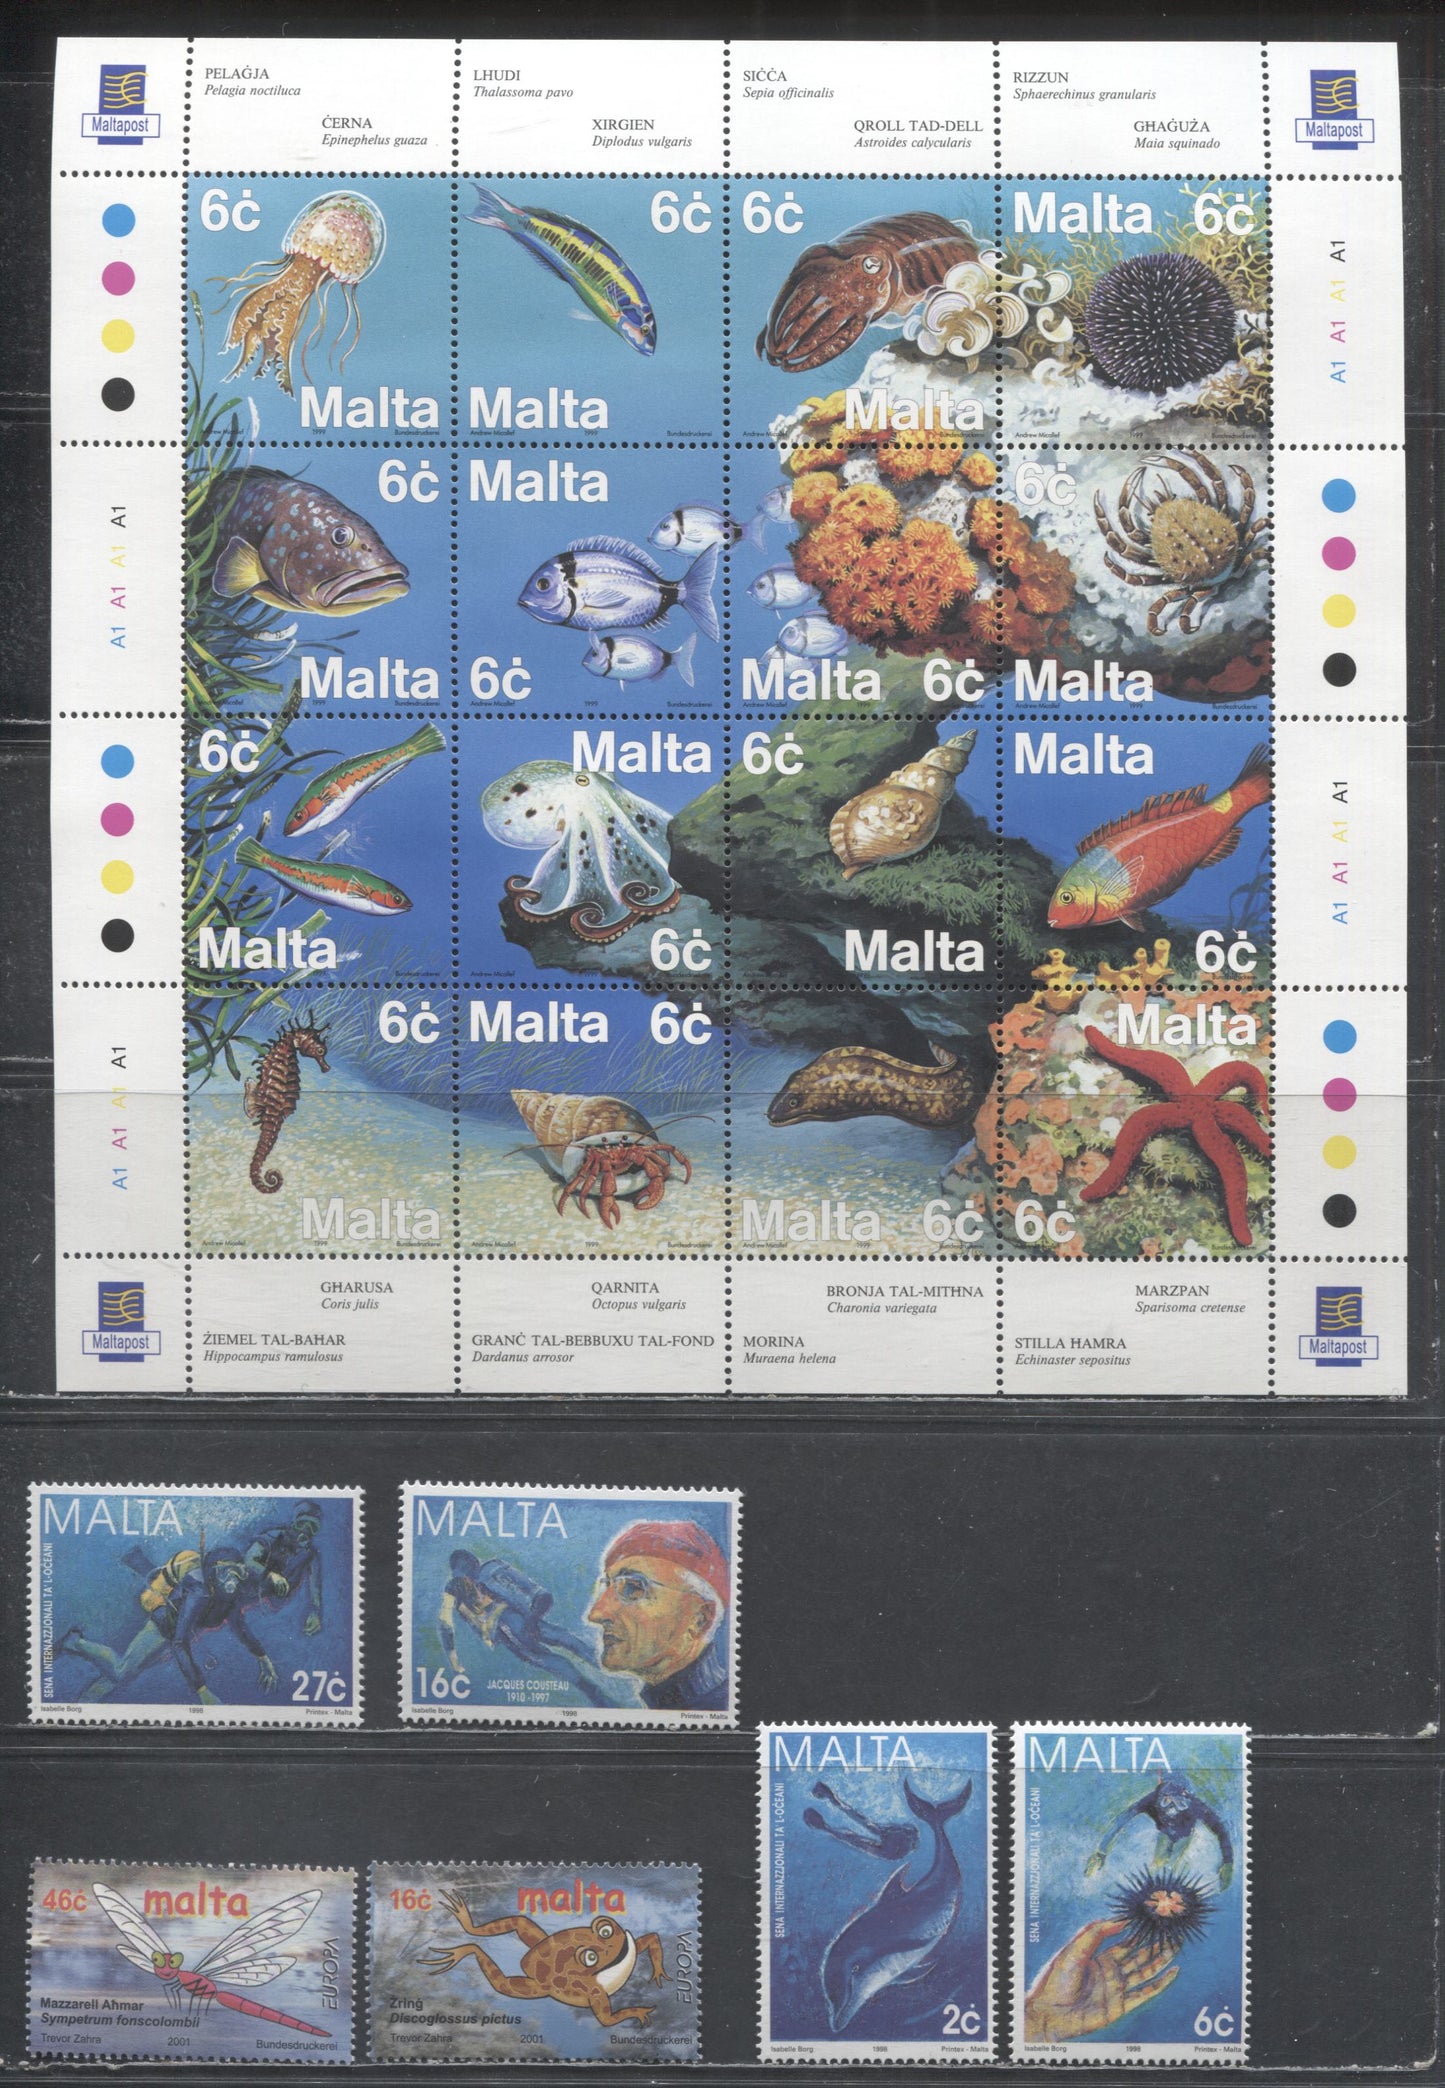 Lot 66 Malta SC#946/1054 1998-2001 International Year Of The Ocean - Europa Issues, 7 VFNH Singles & Souvenir Sheet Of 16, Click on Listing to See ALL Pictures, 2017 Scott Cat. $19.15